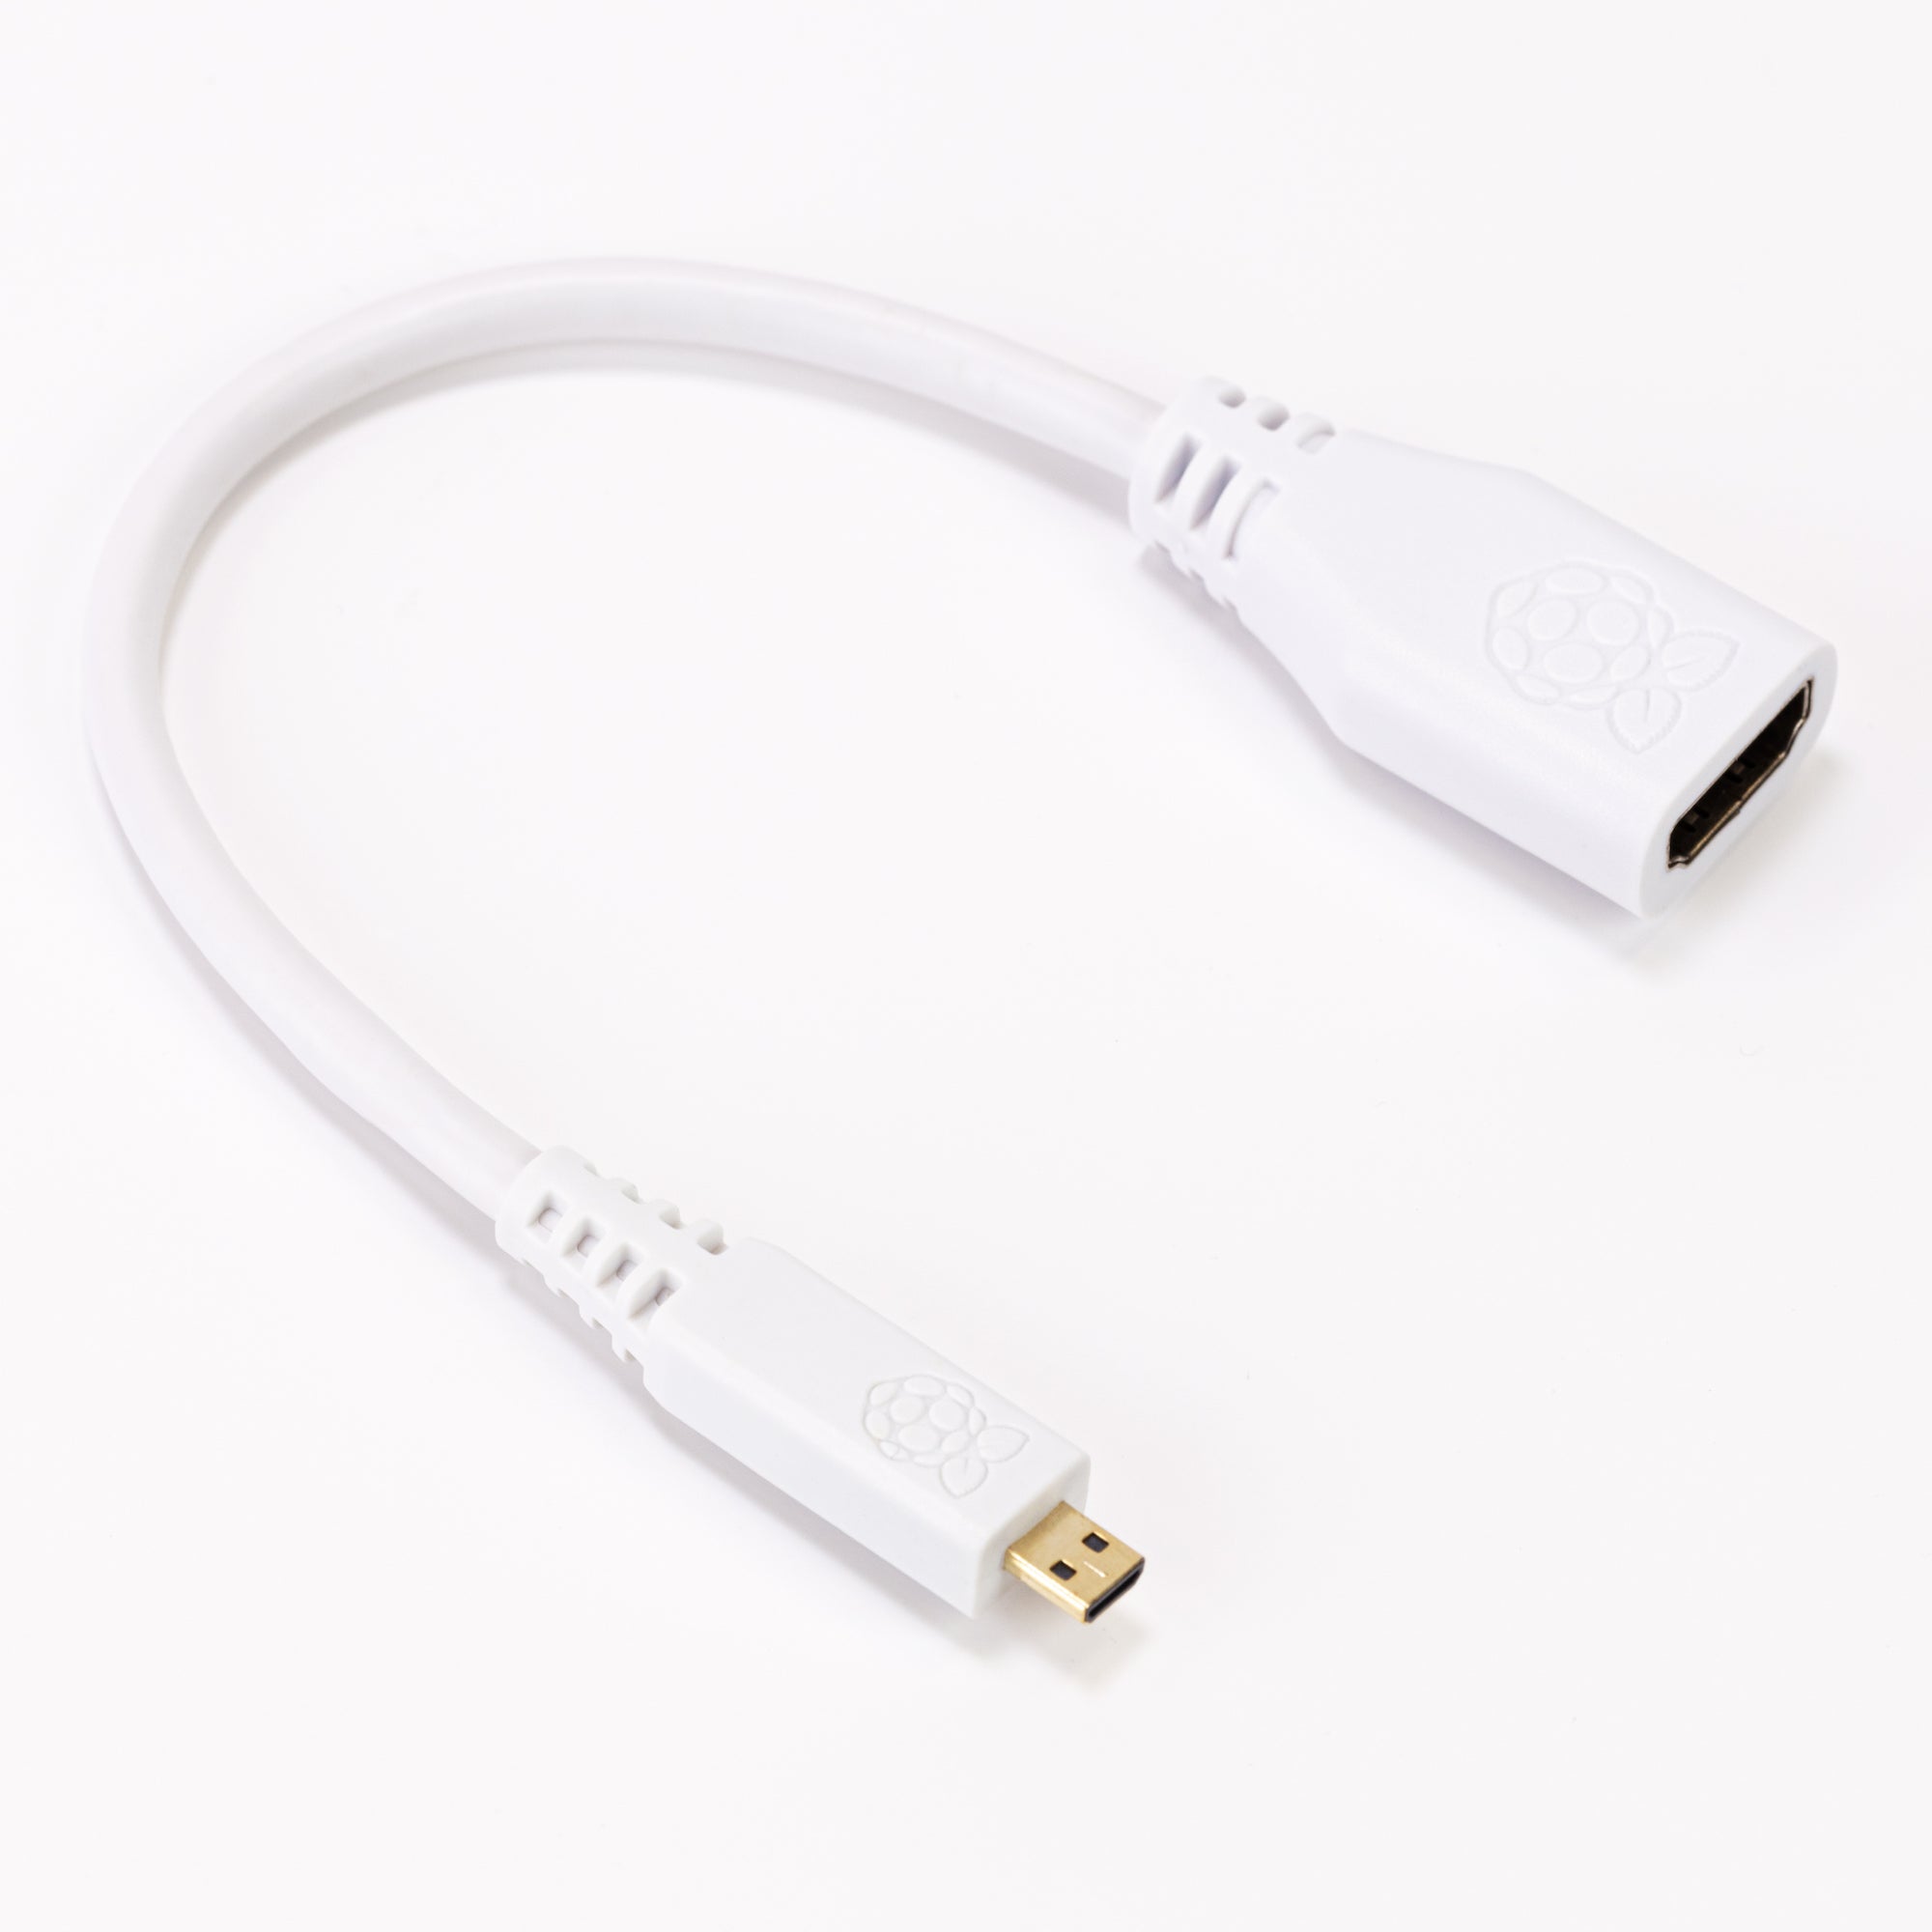 Micro-HDMI to HDMI cable for Pi 4, 3ft, Black 